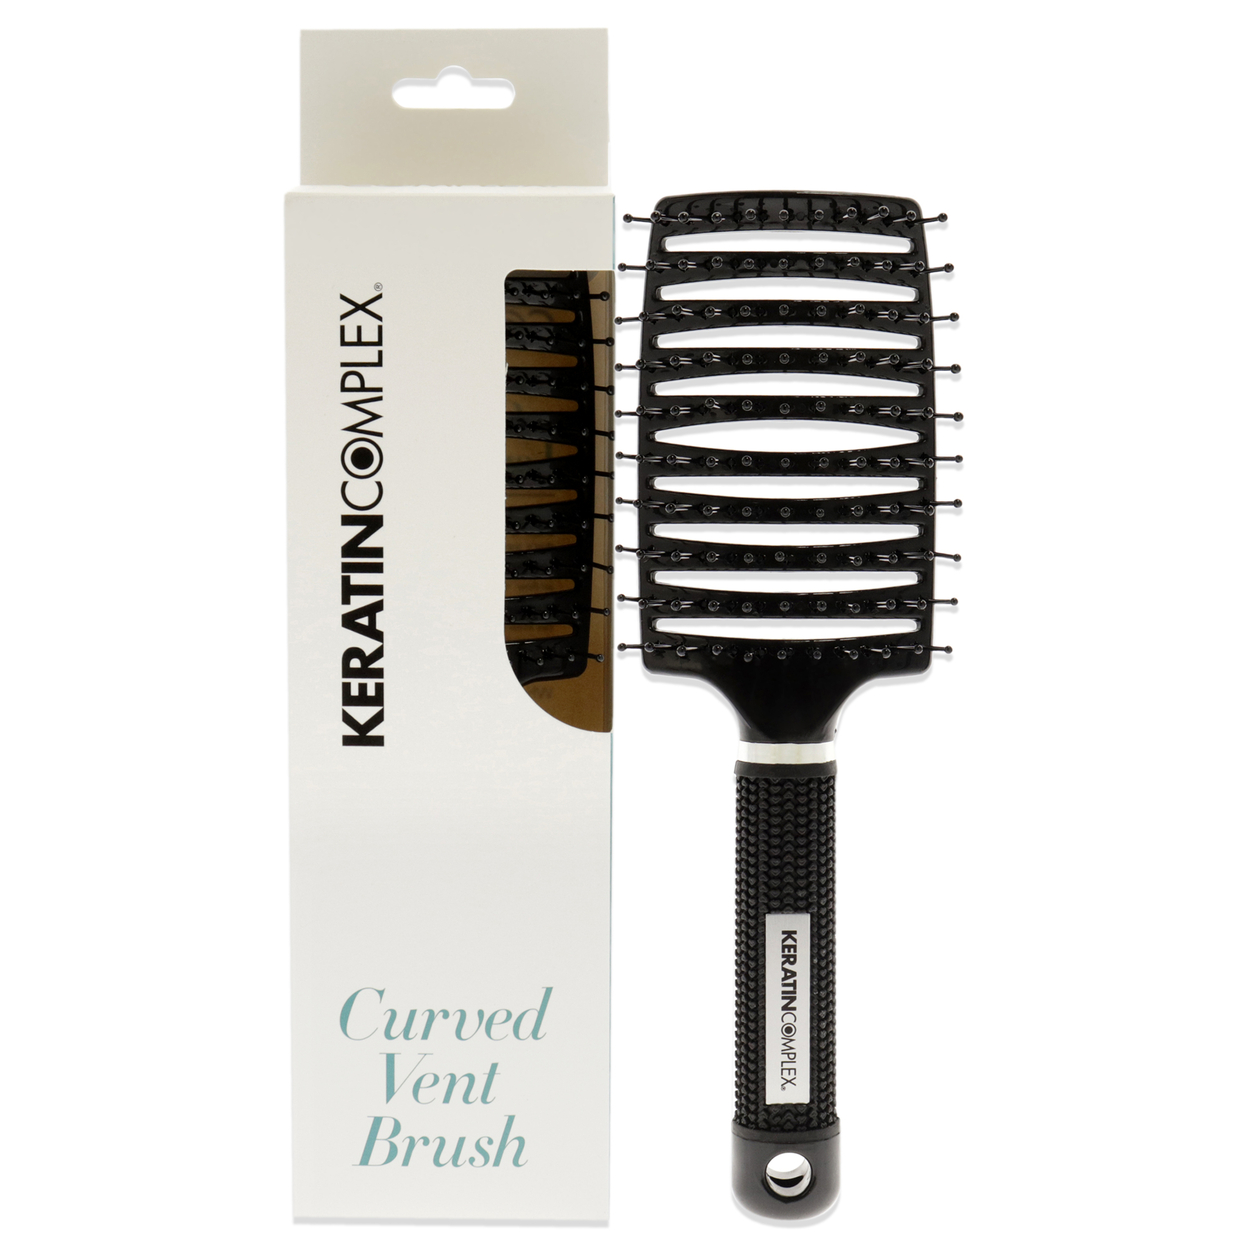 Keratin Complex Unisex HAIRCARE Curved Vent Brush - Black 1 Pc